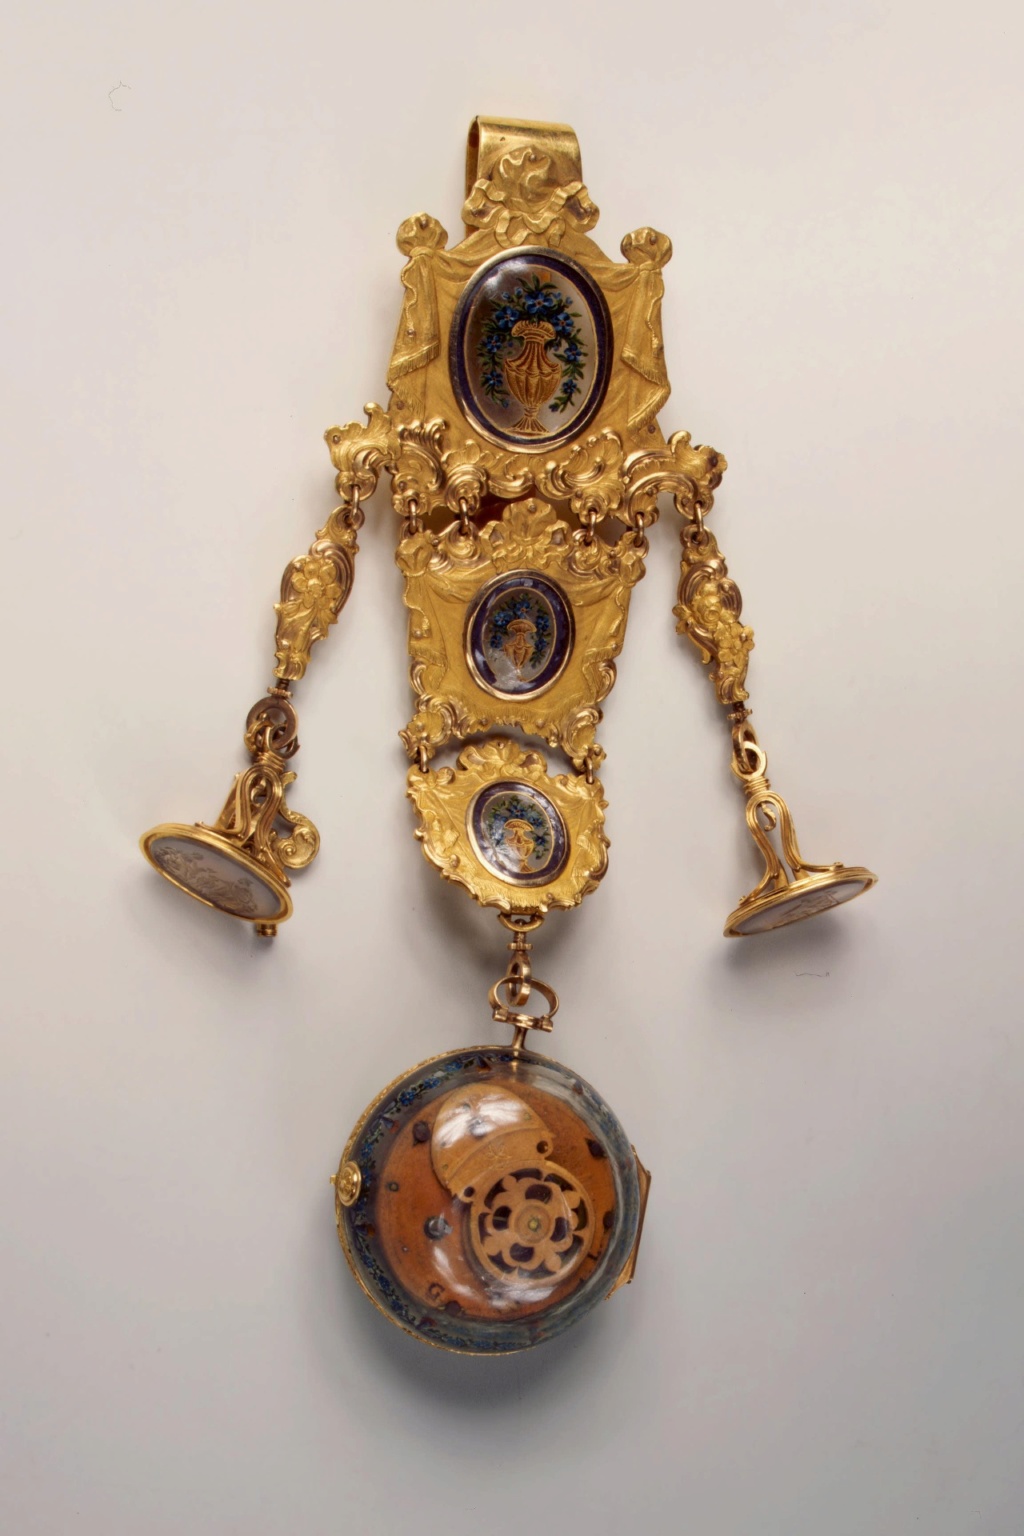 Exposition : Jewels ! Glittering at the Russian Court, Hermitage Amsterdam Woa_im83